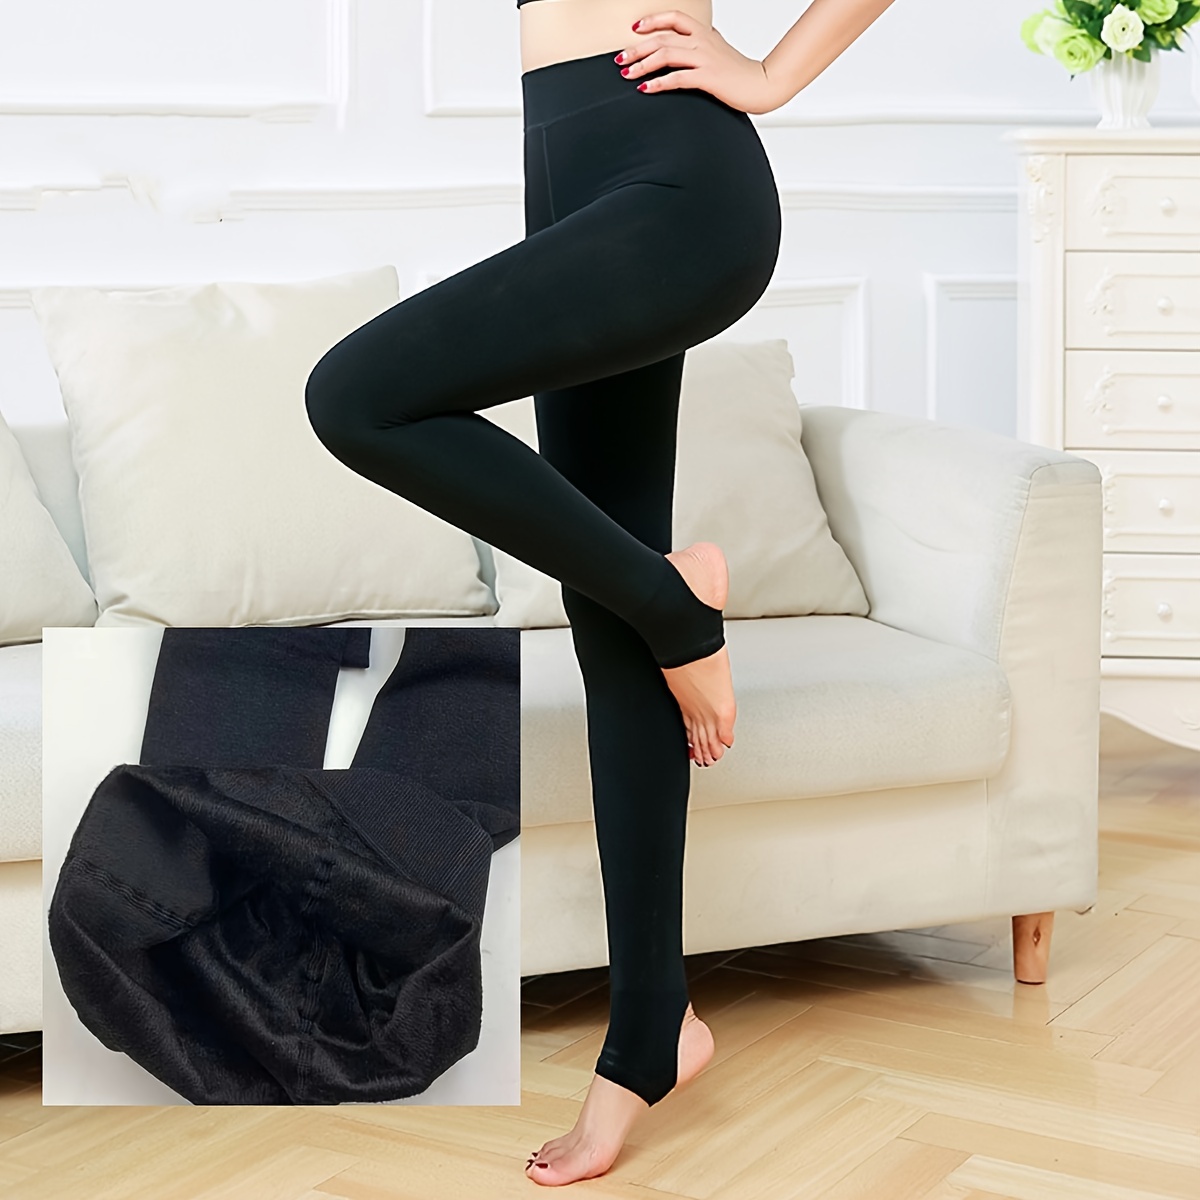 The best options in thermal tights for women in skin tone